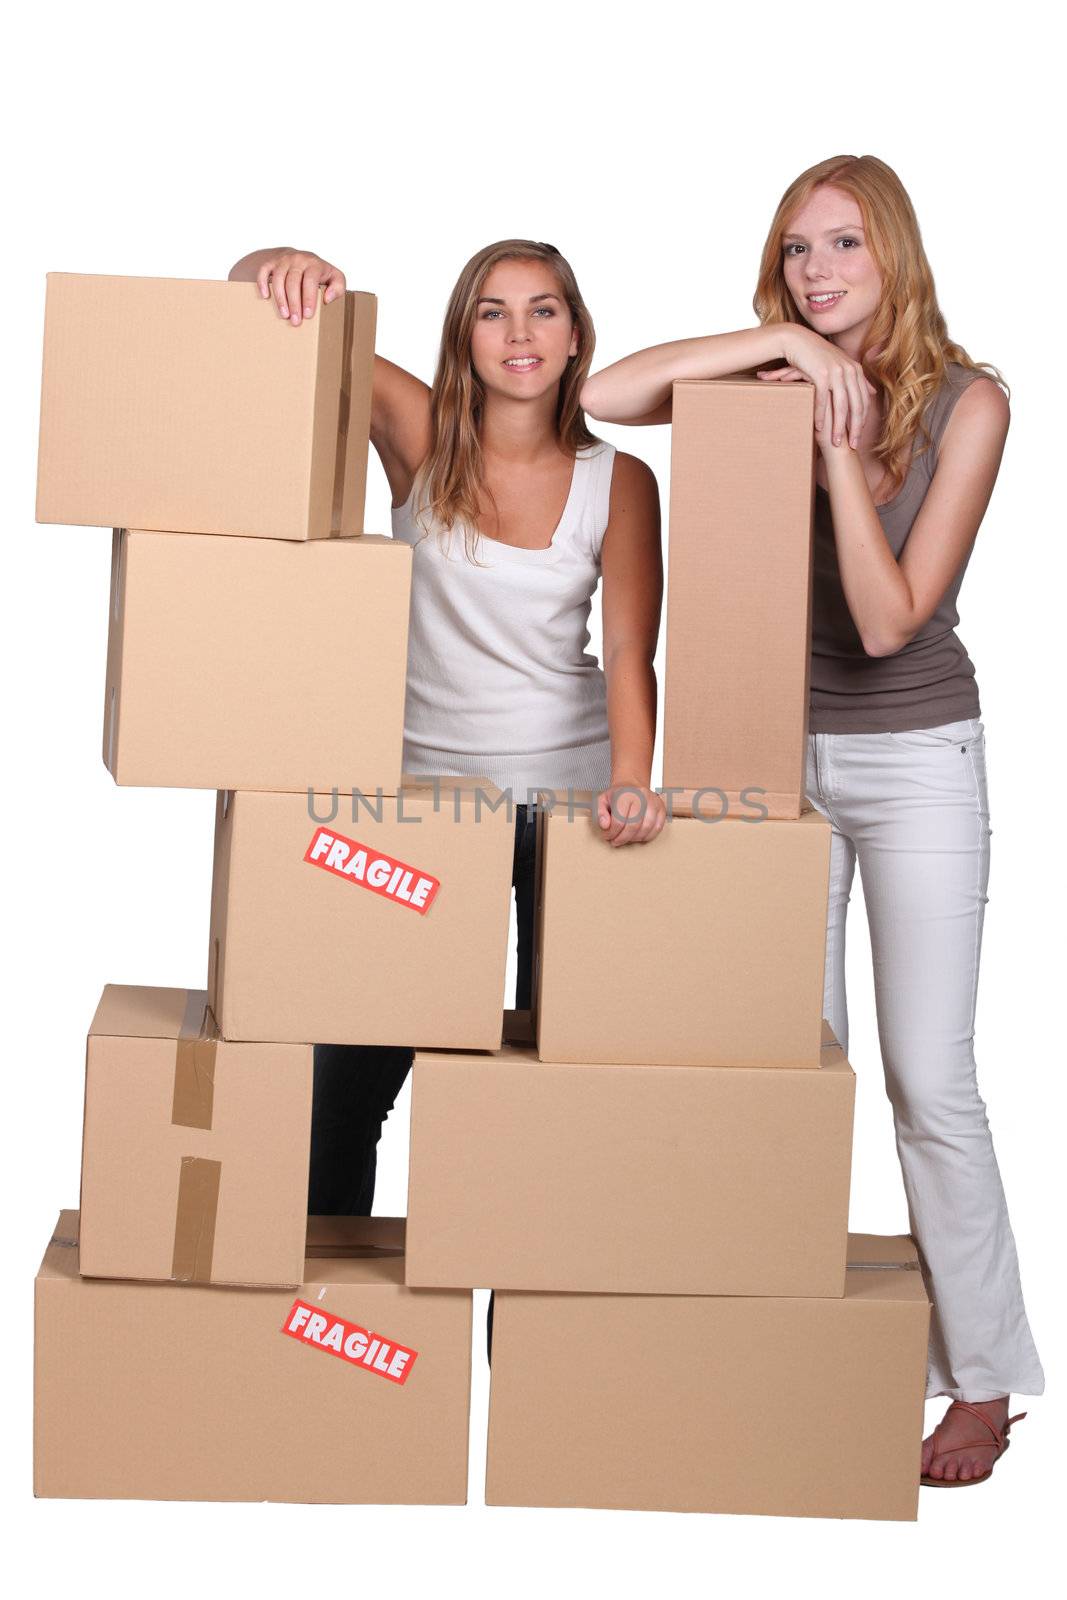 Girls surrounded by boxes by phovoir